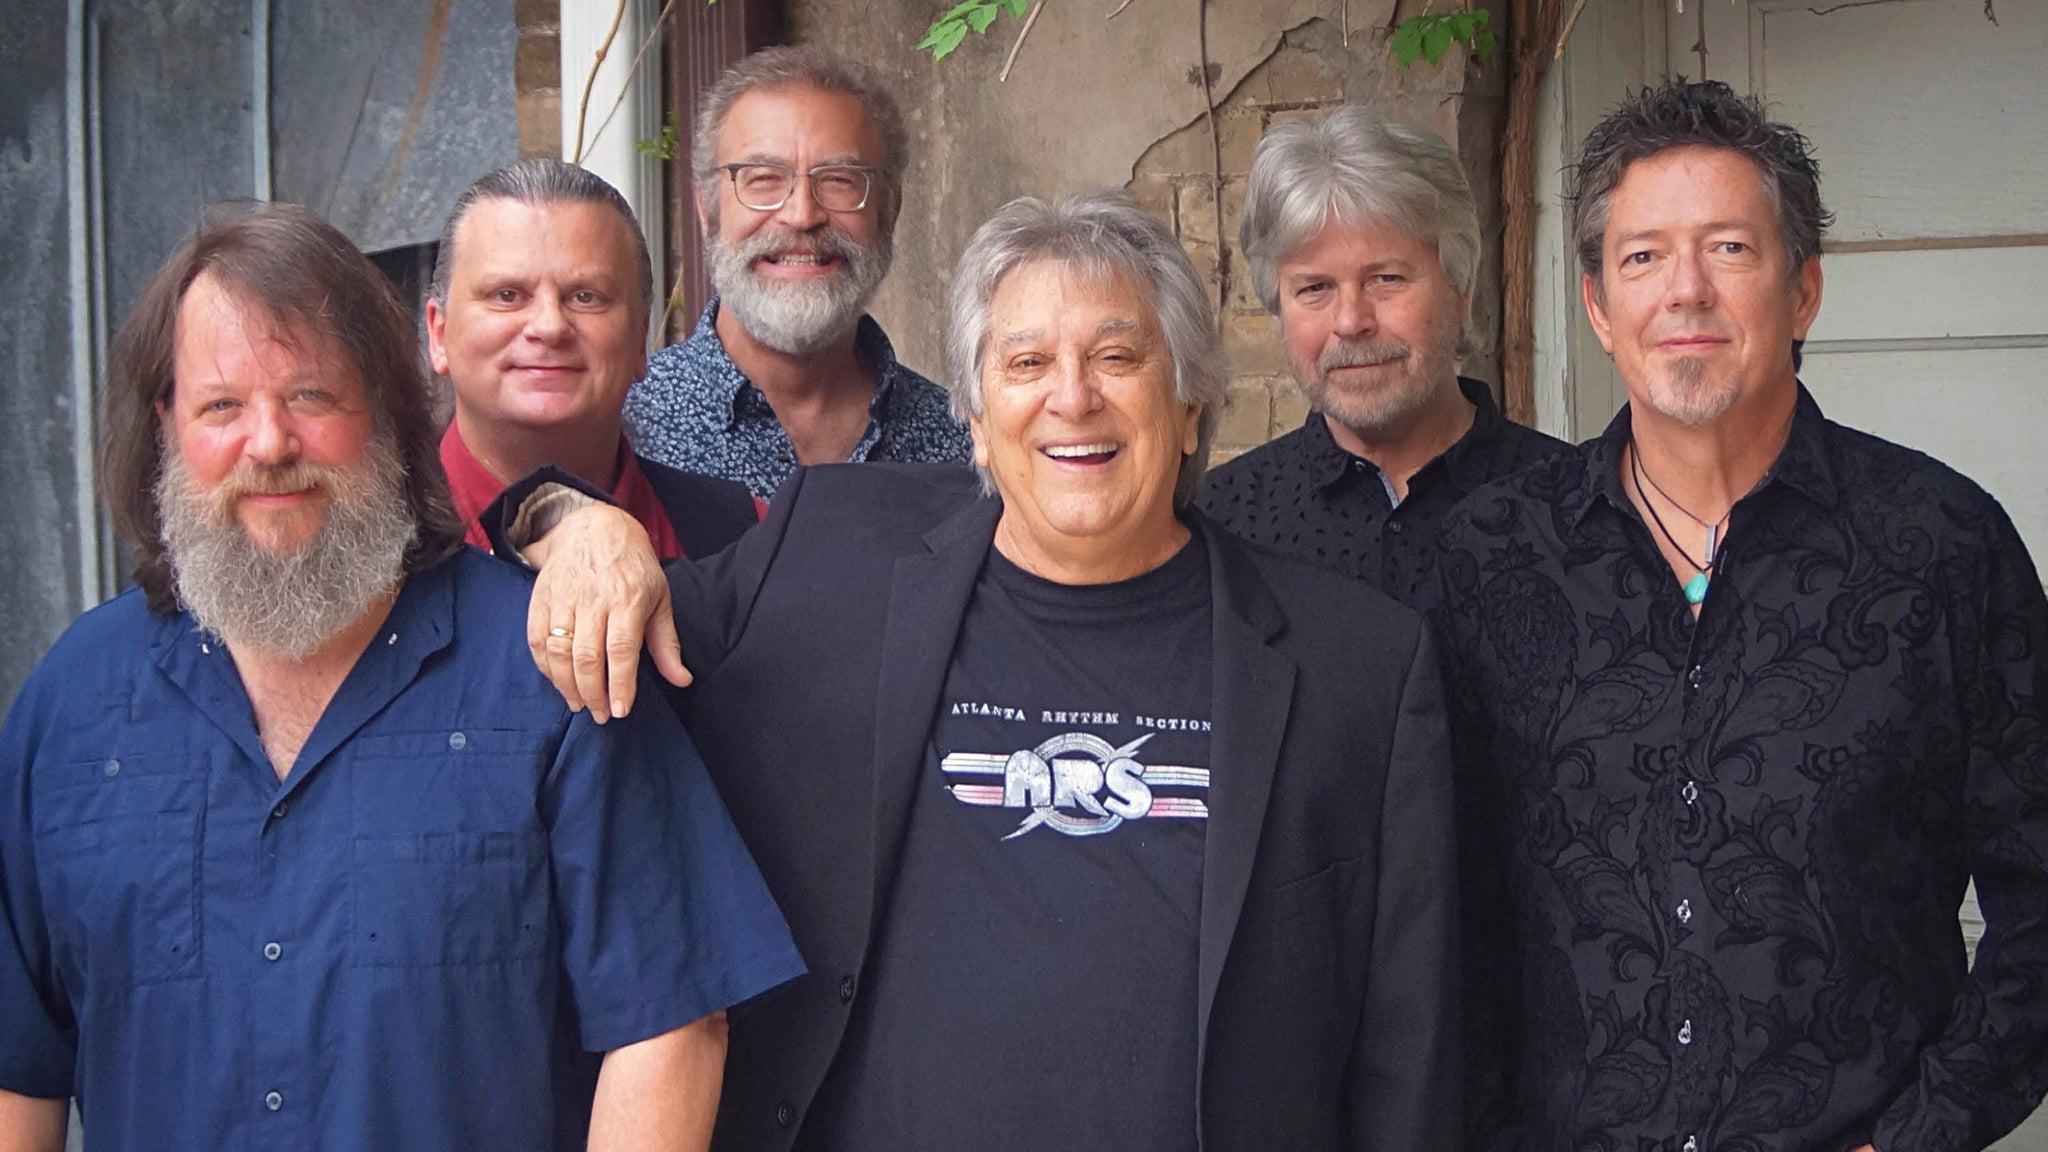 Atlanta Rhythm Section presale passcode for performance tickets in Red Bank, NJ (The Vogel at Count Basie Center for the Arts)